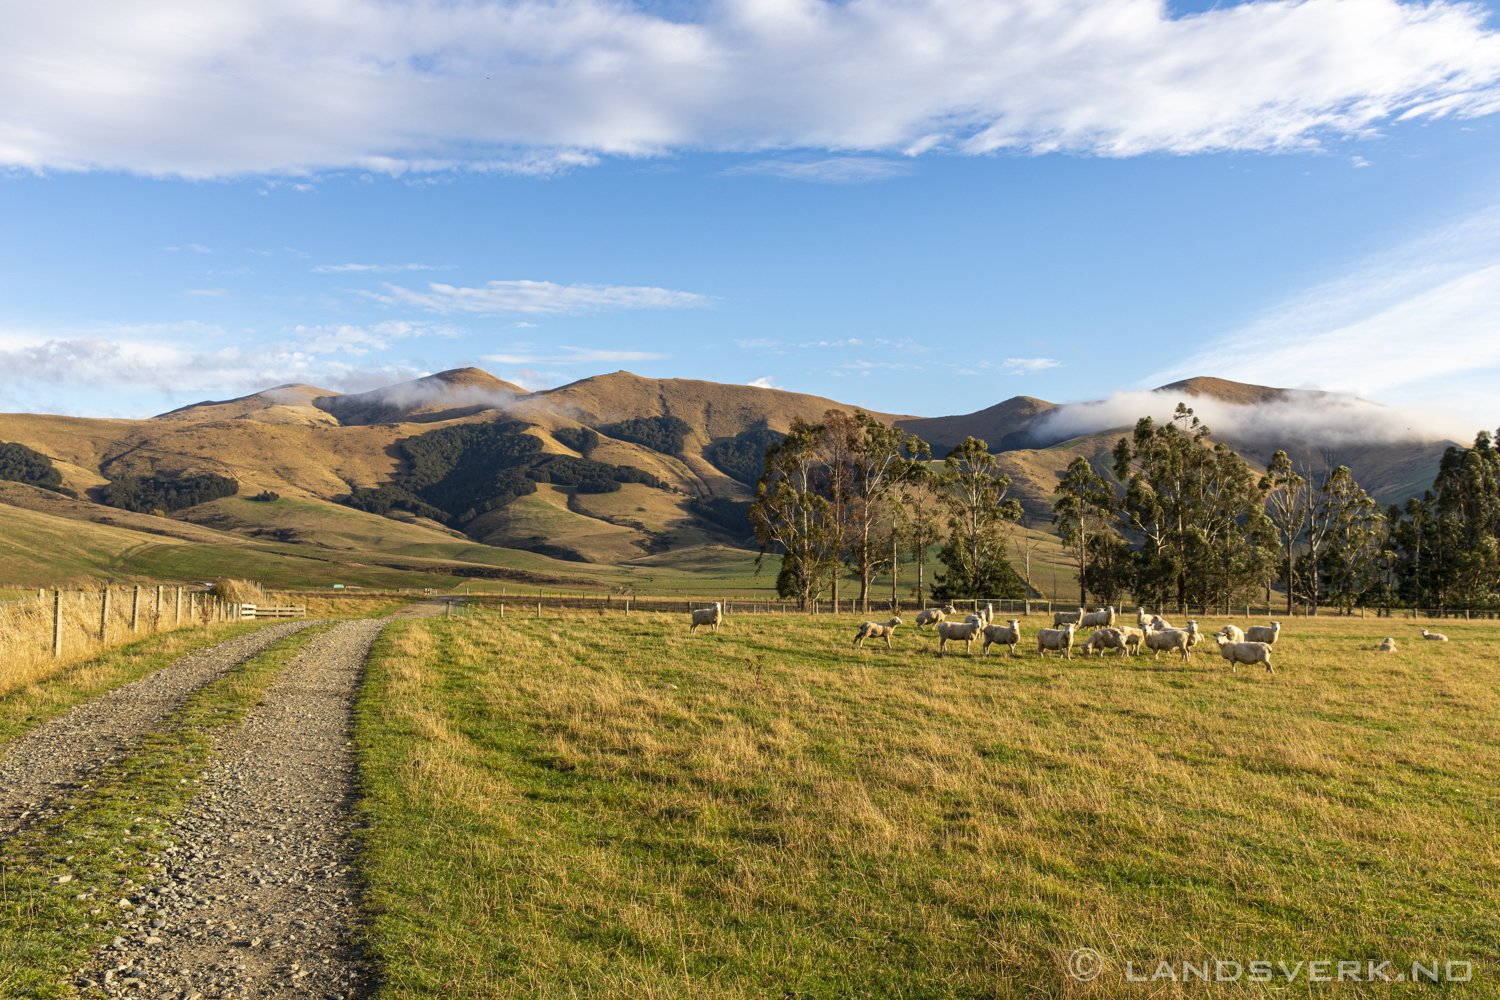 Between Te Anau and Queenstown, New Zealand. 

(Canon EOS 5D Mark IV / Canon EF 24-70mm f/2.8 L II USM)